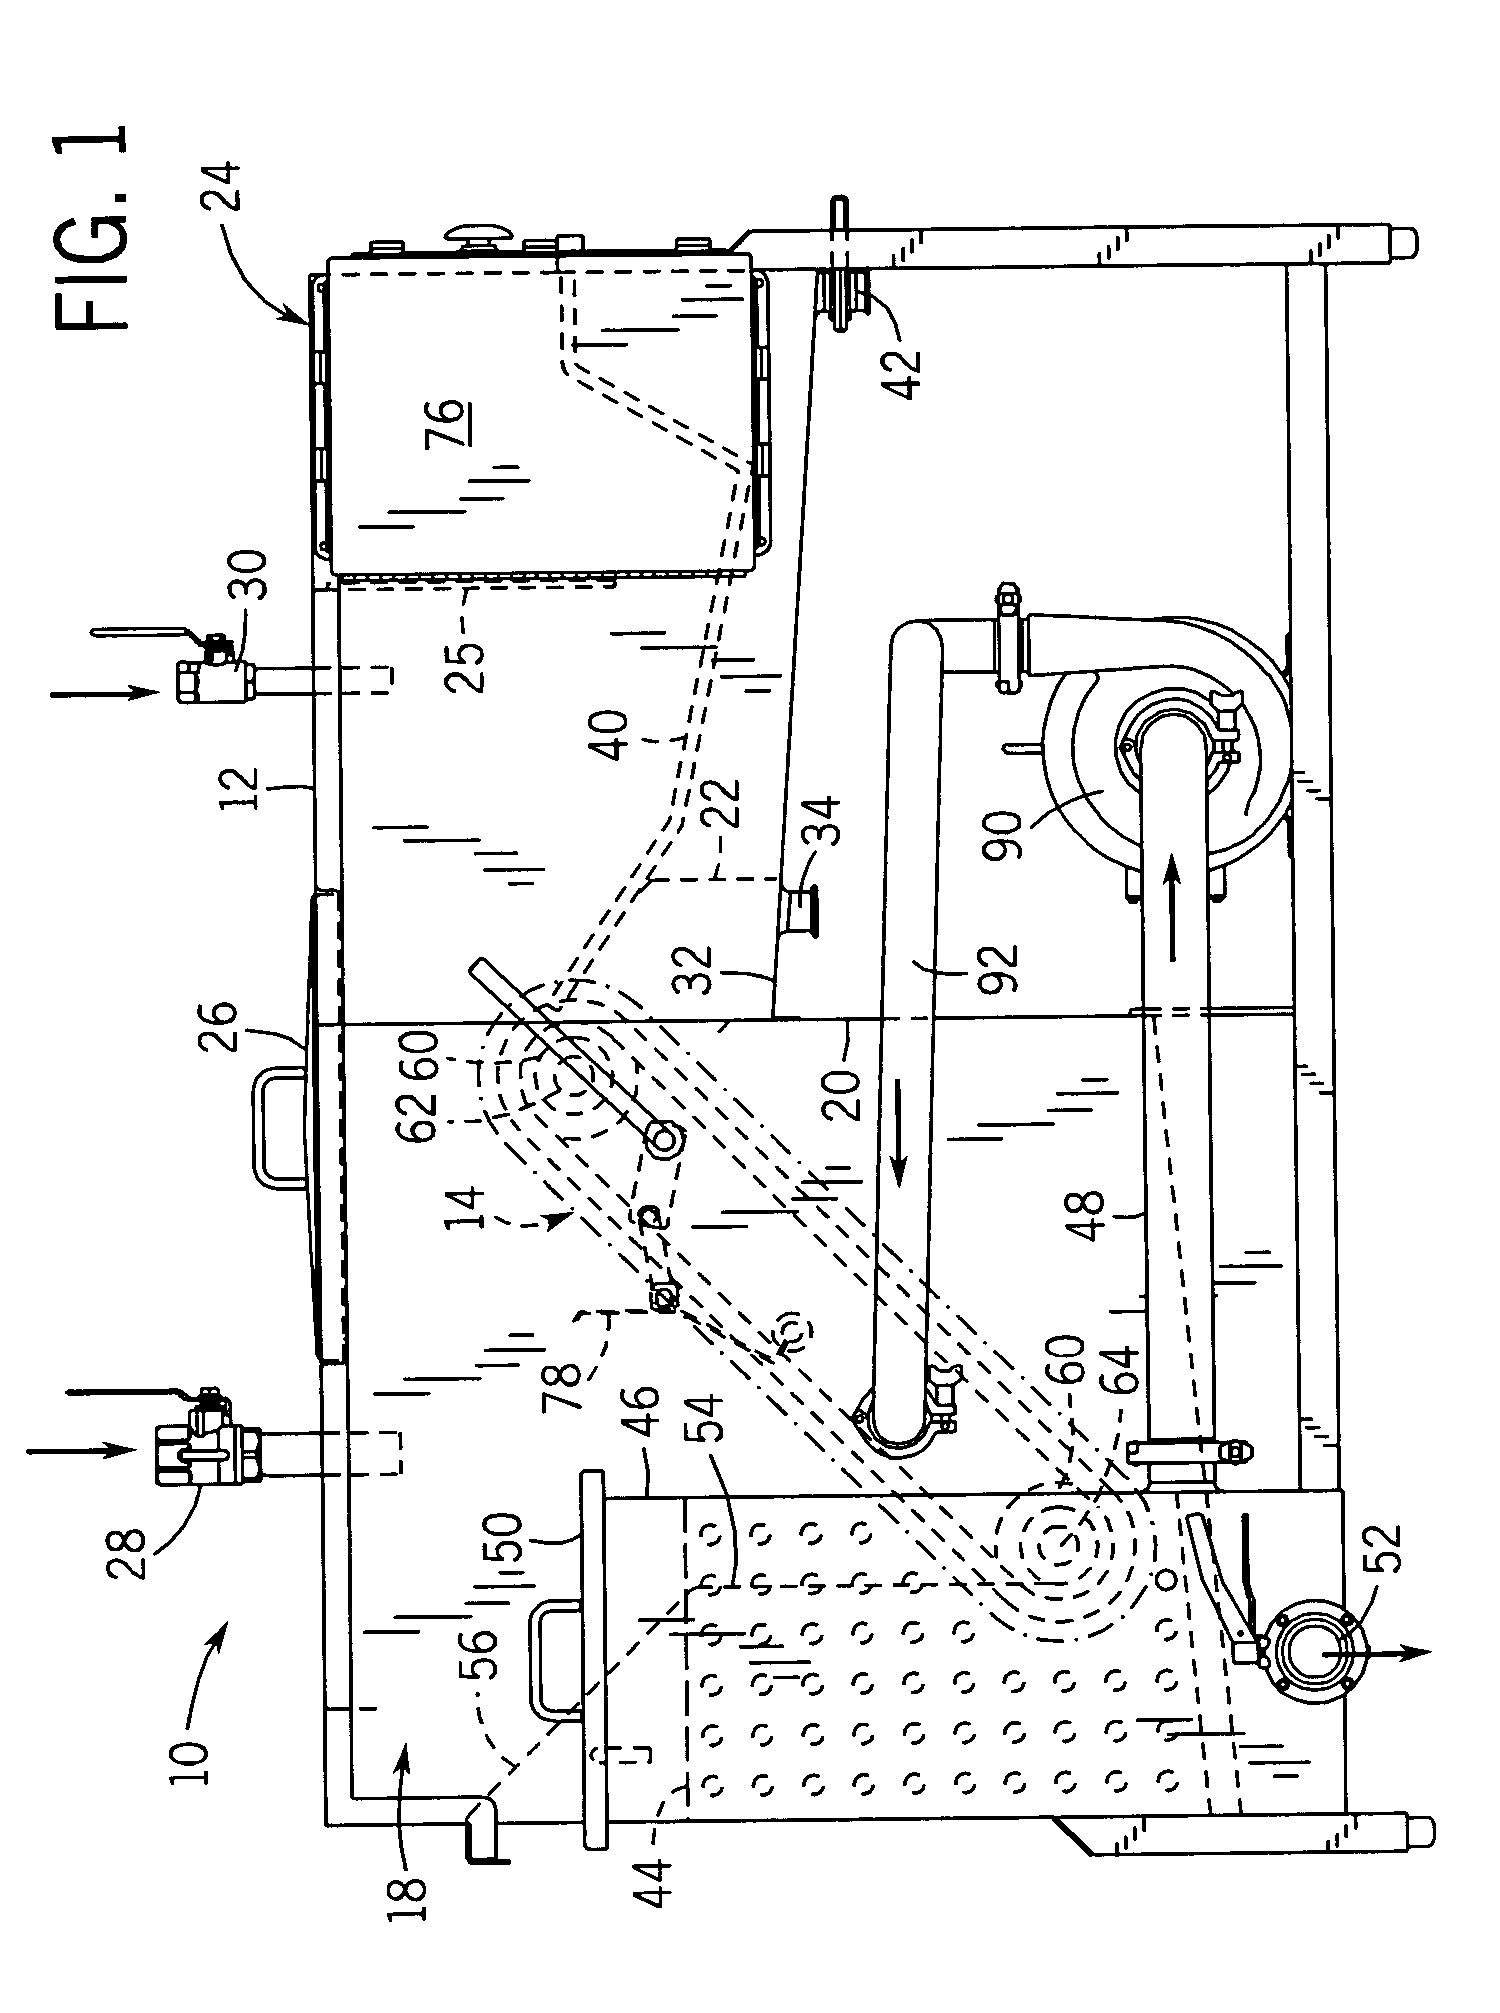 Single-conveyor elongated object cleaning system